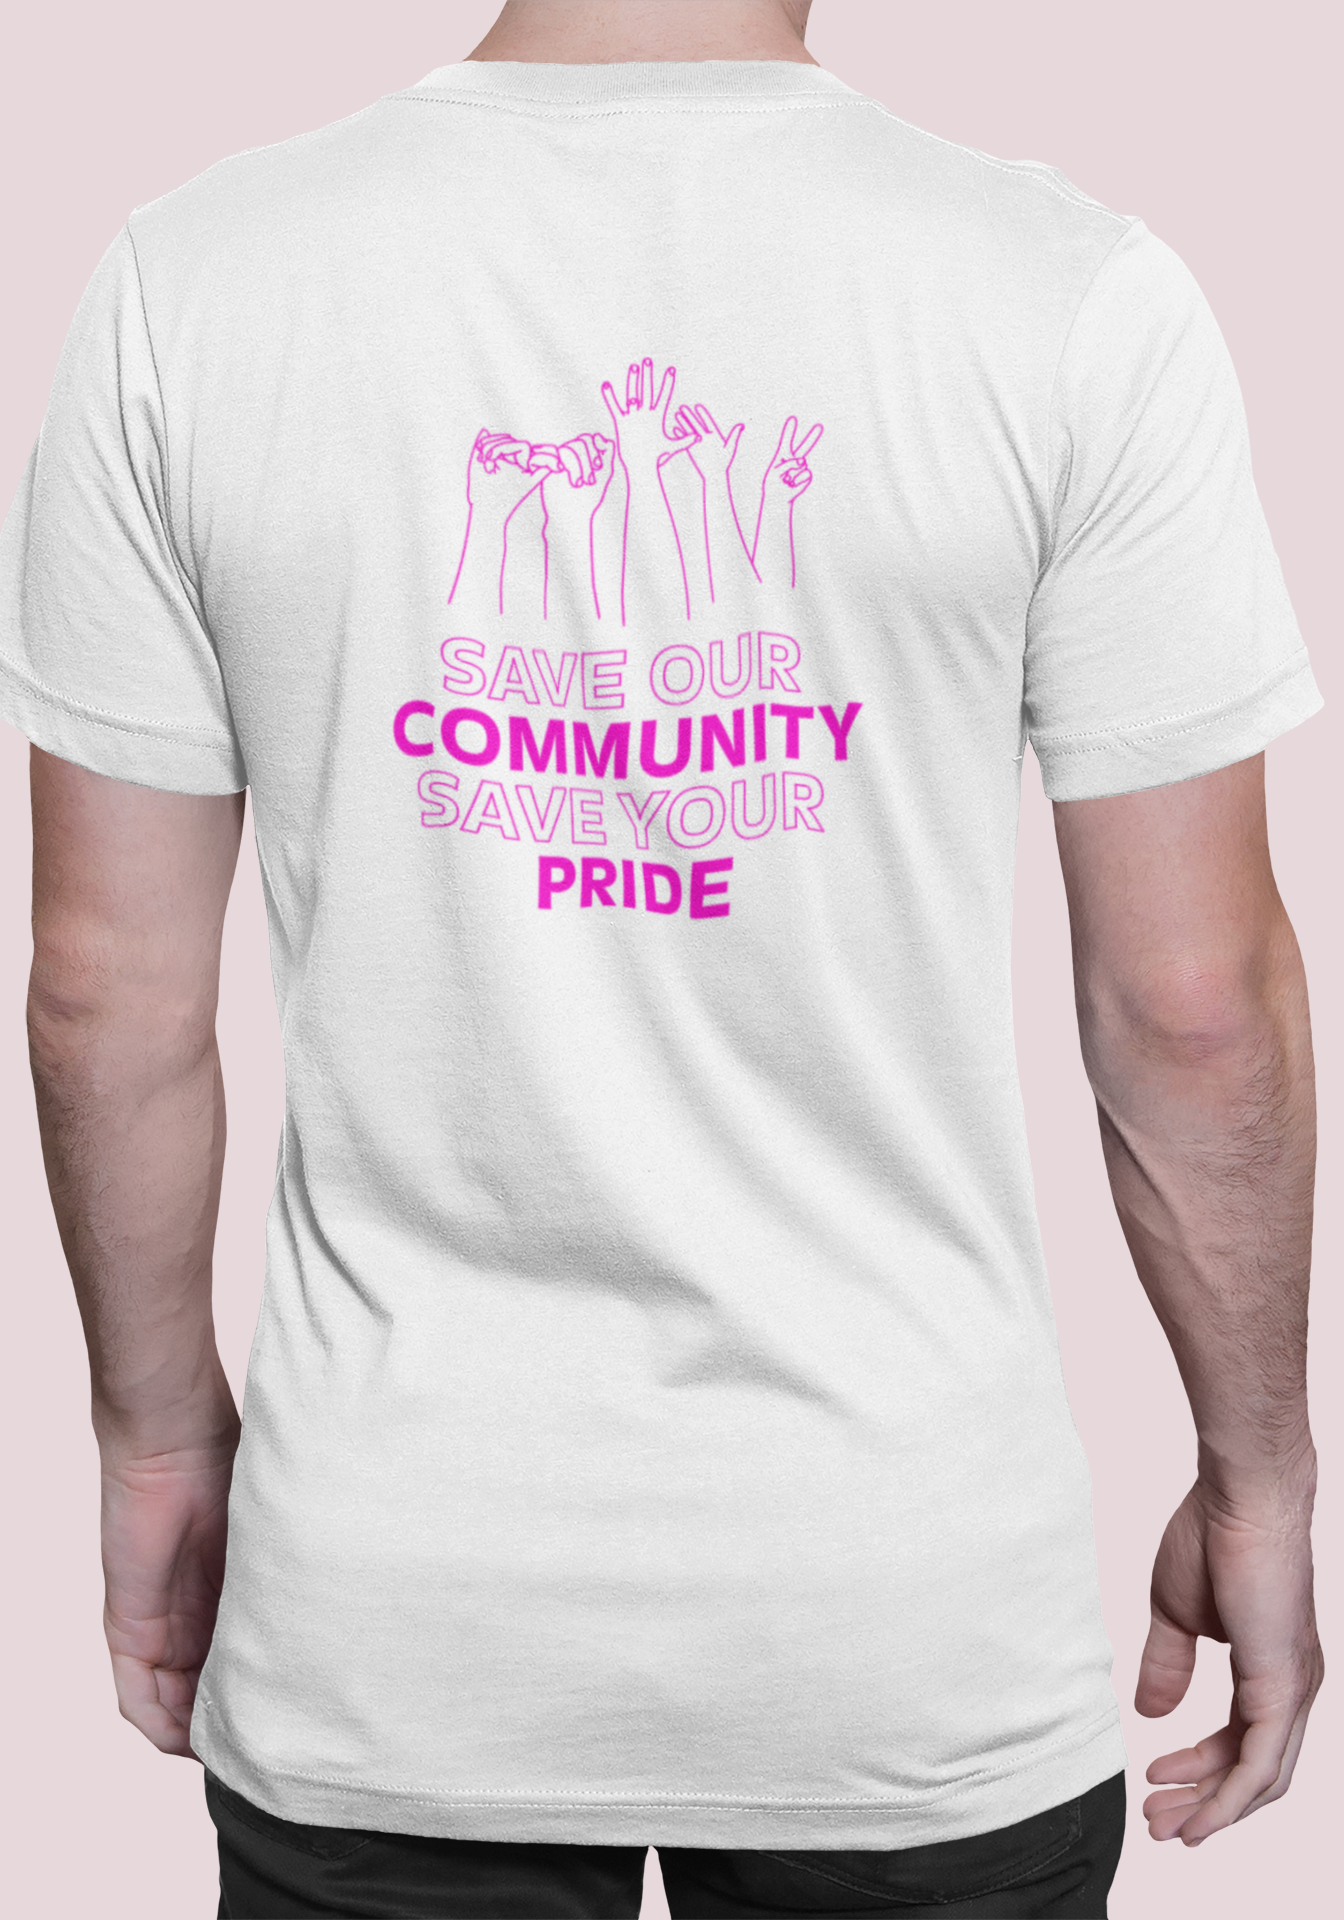 CSD T-Shirt "Save your Pride"